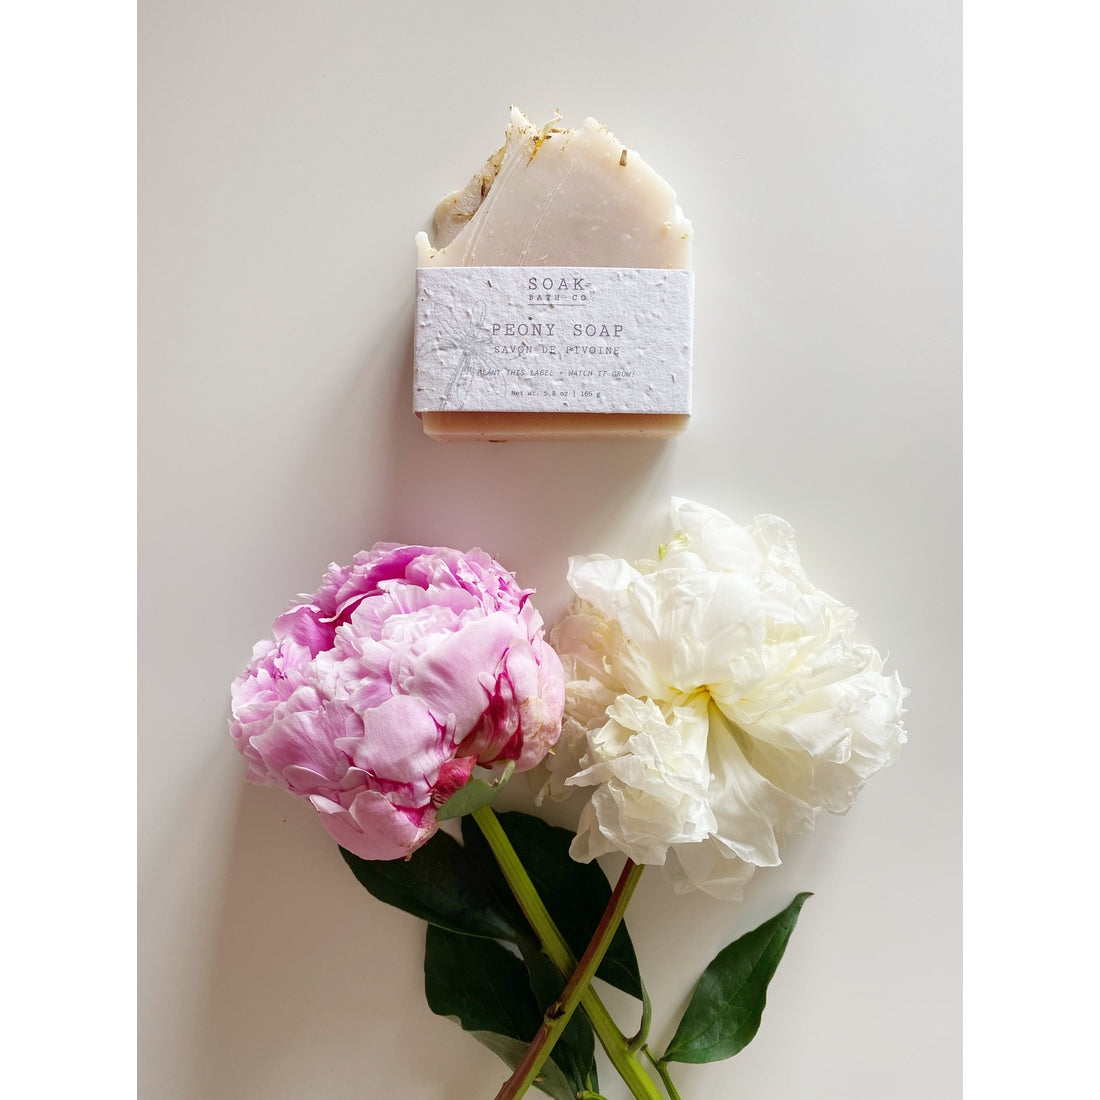 A bar of SOAK Bath Co. - Peony Soap Bar packaged in a white box with gold text, made from plantable seed paper, placed next to two lush peonies in pink and white, on a light beige surface